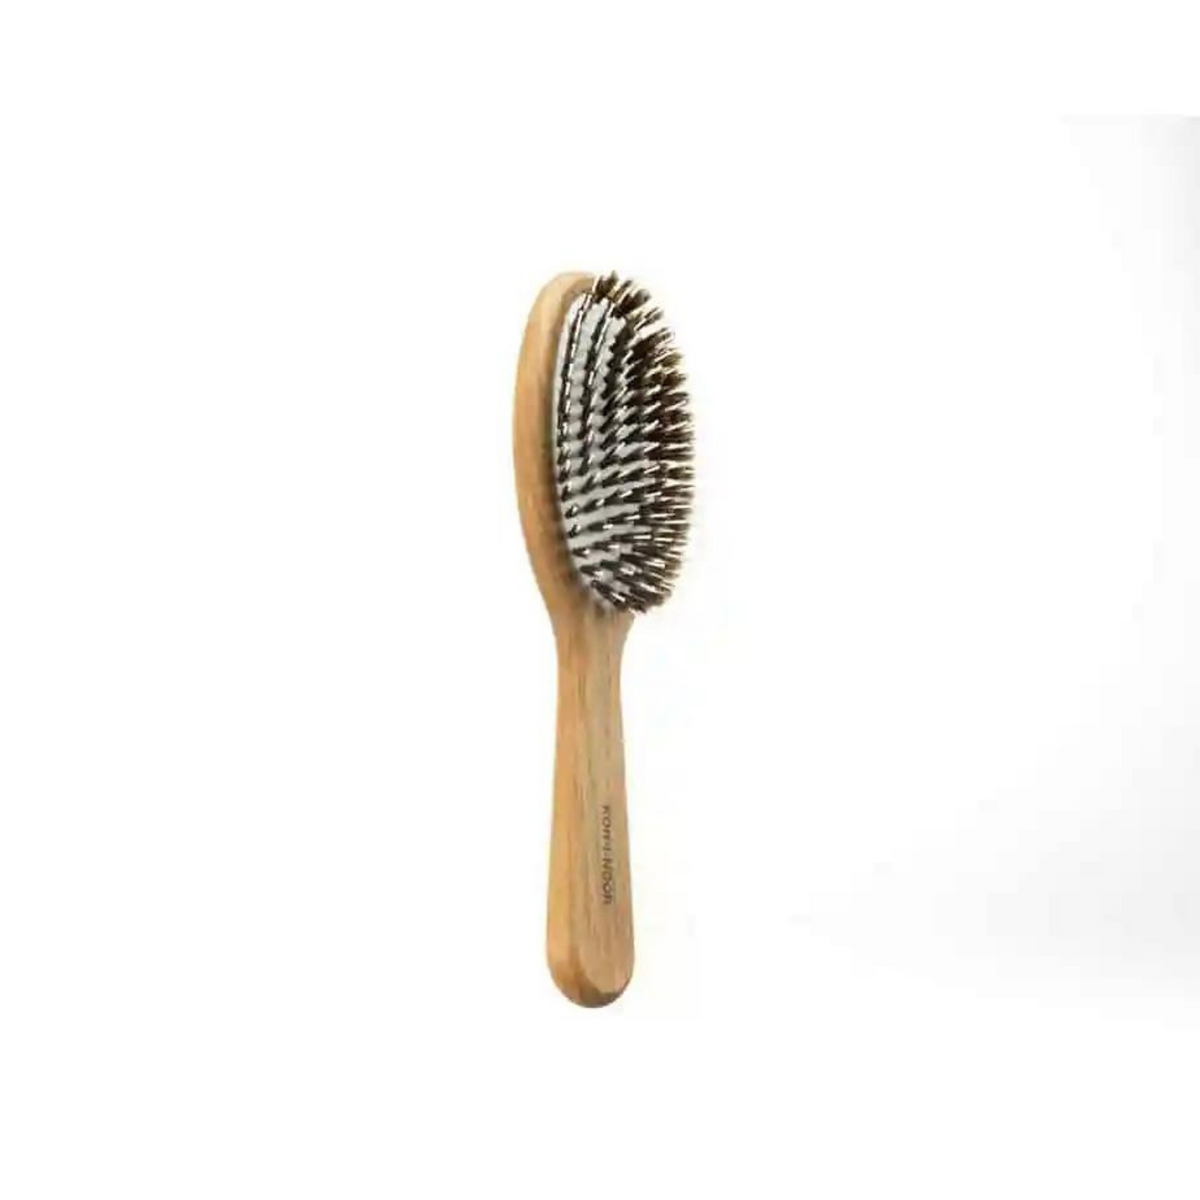 Primary Image of Koh-I-Noor Large Wooden Oval Brush with Mixed Bristles 